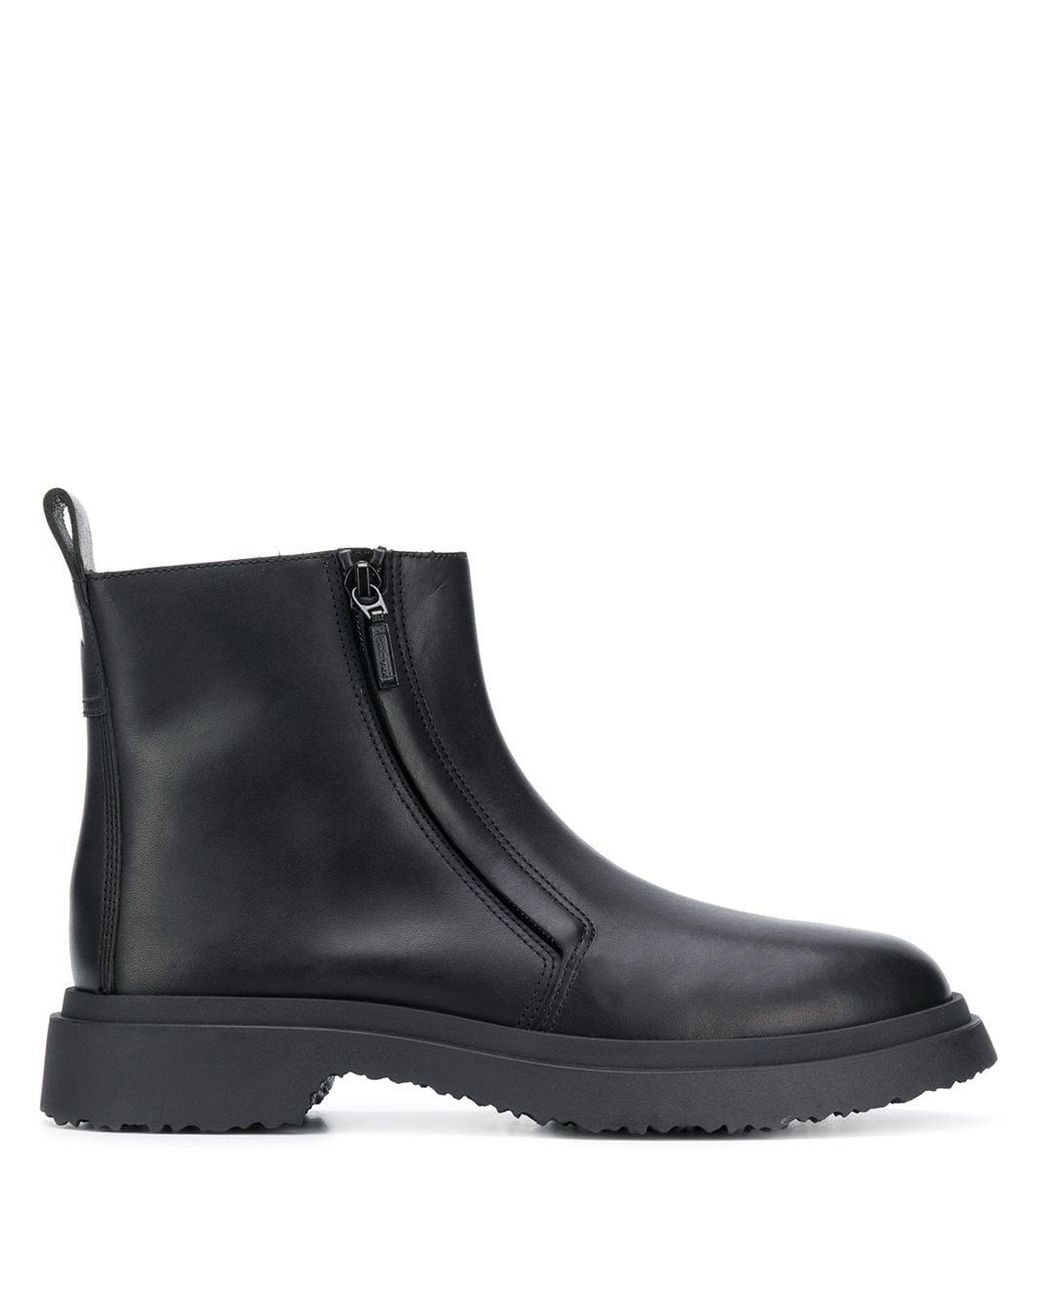 Camper Leather Walden Chunky Boots in Black - Lyst